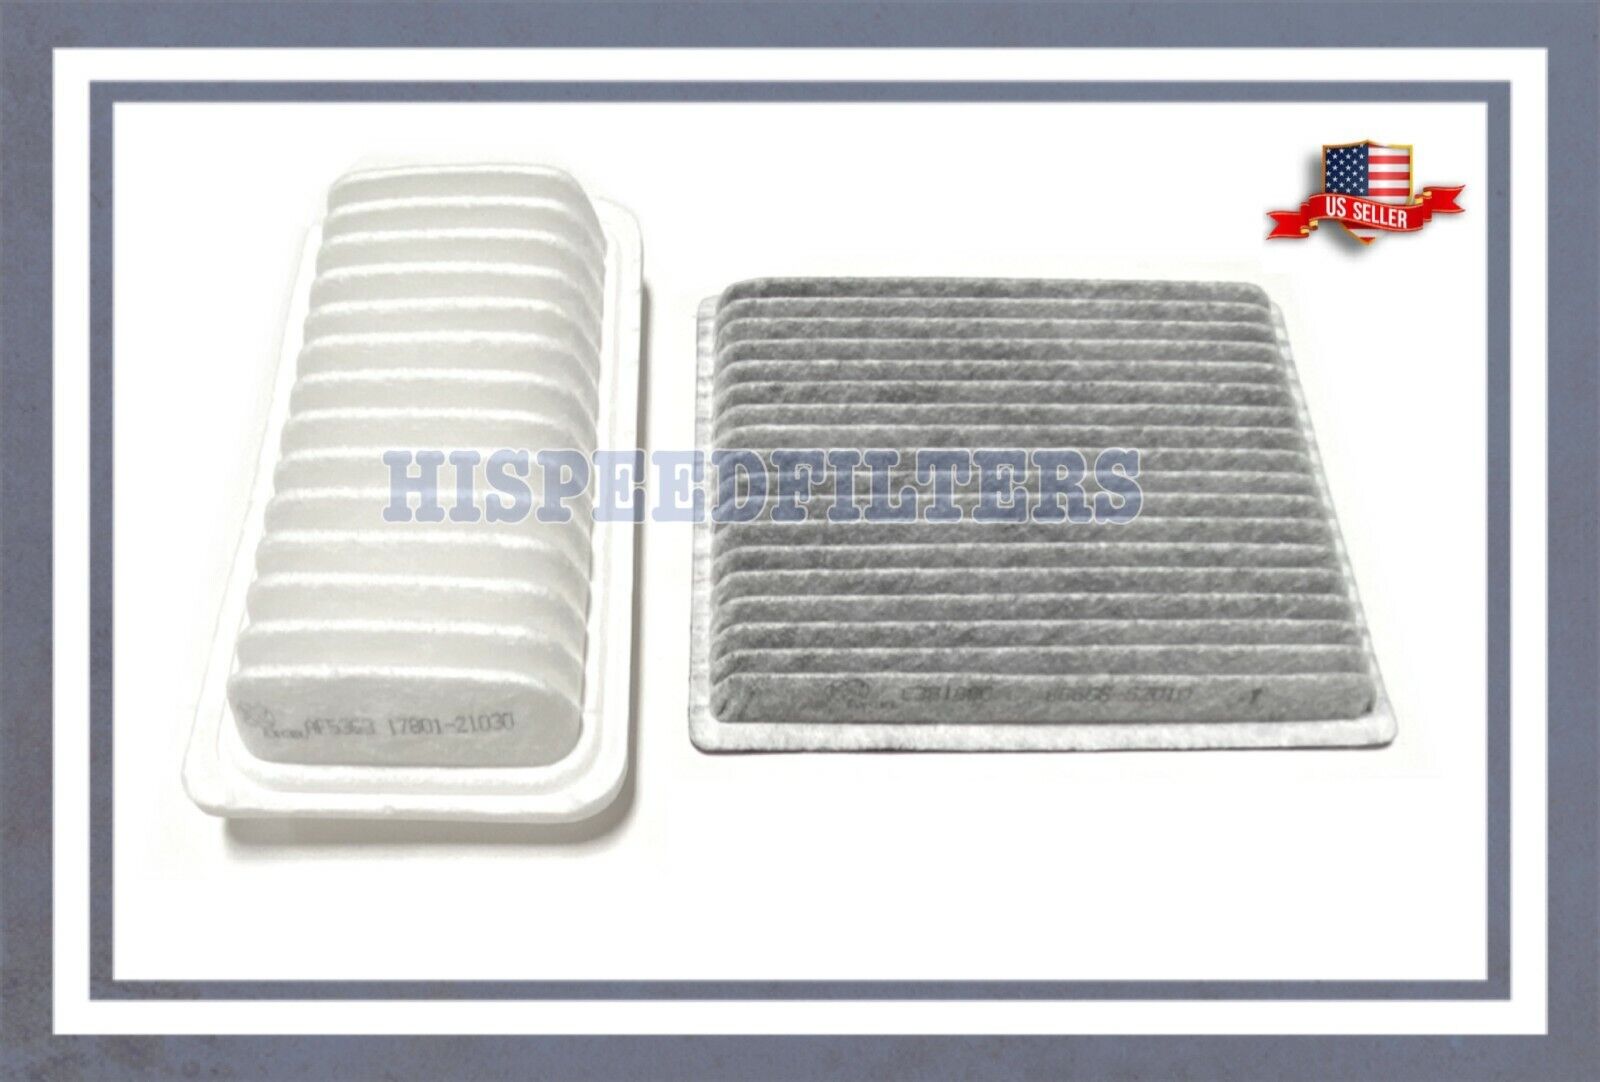 ENGINE AND CARBON CABIN AIR FILTER for 04-06 Scion xA & xB / 2000-05 Toyota Echo